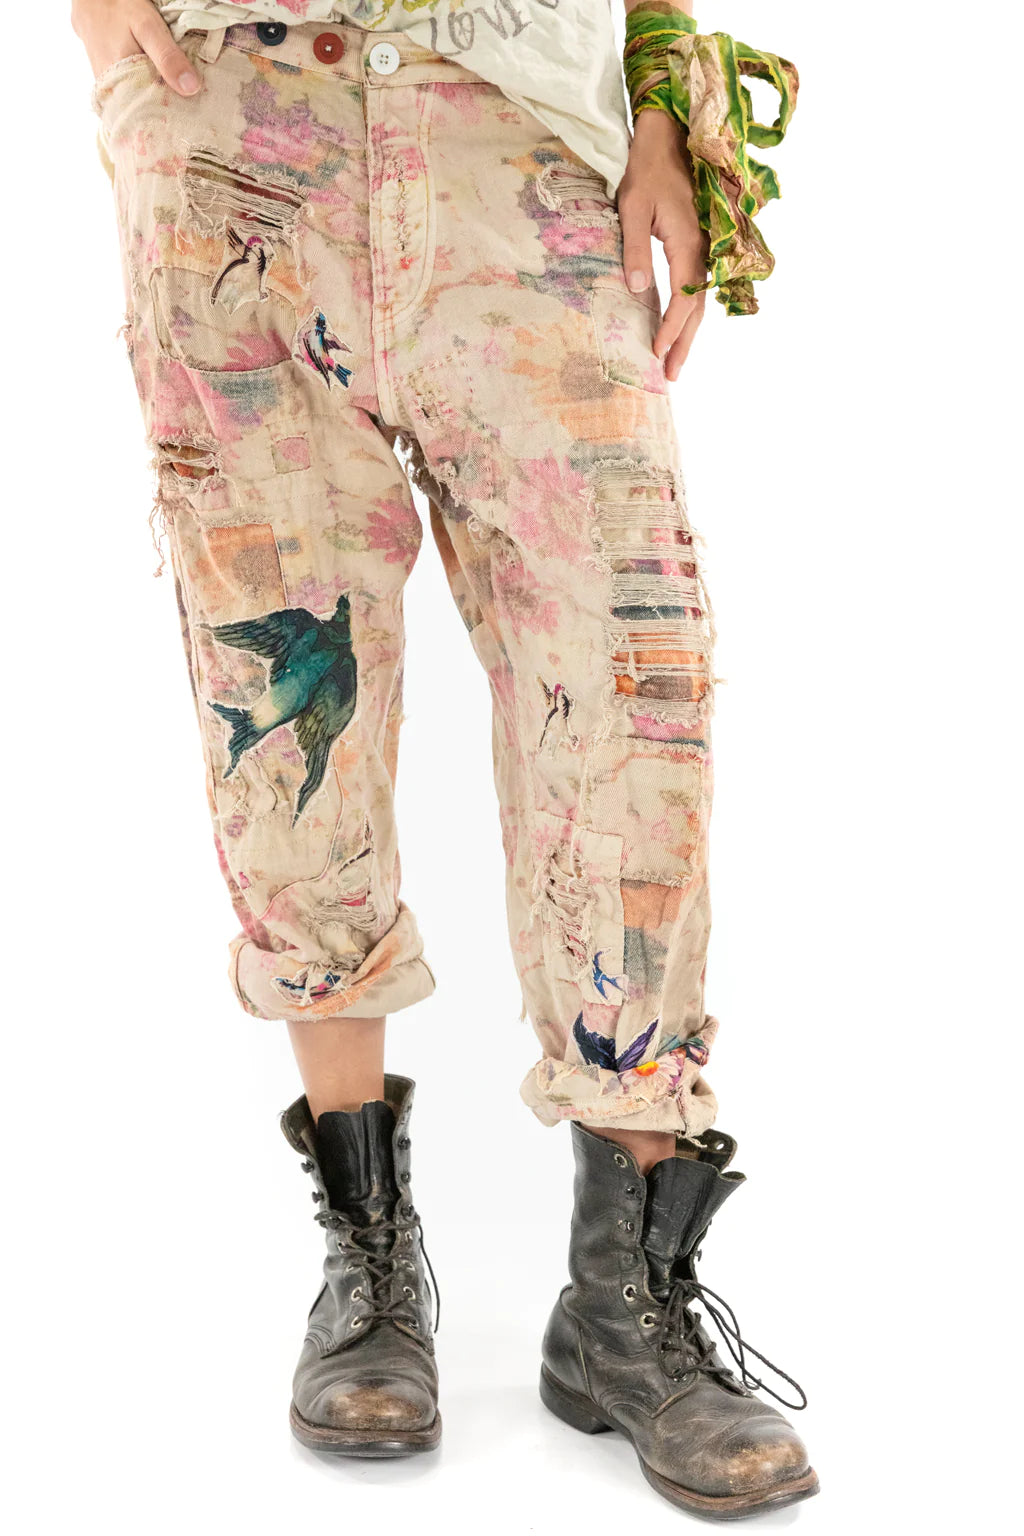 Printed Bobbie Trousers by Magnolia Pearl